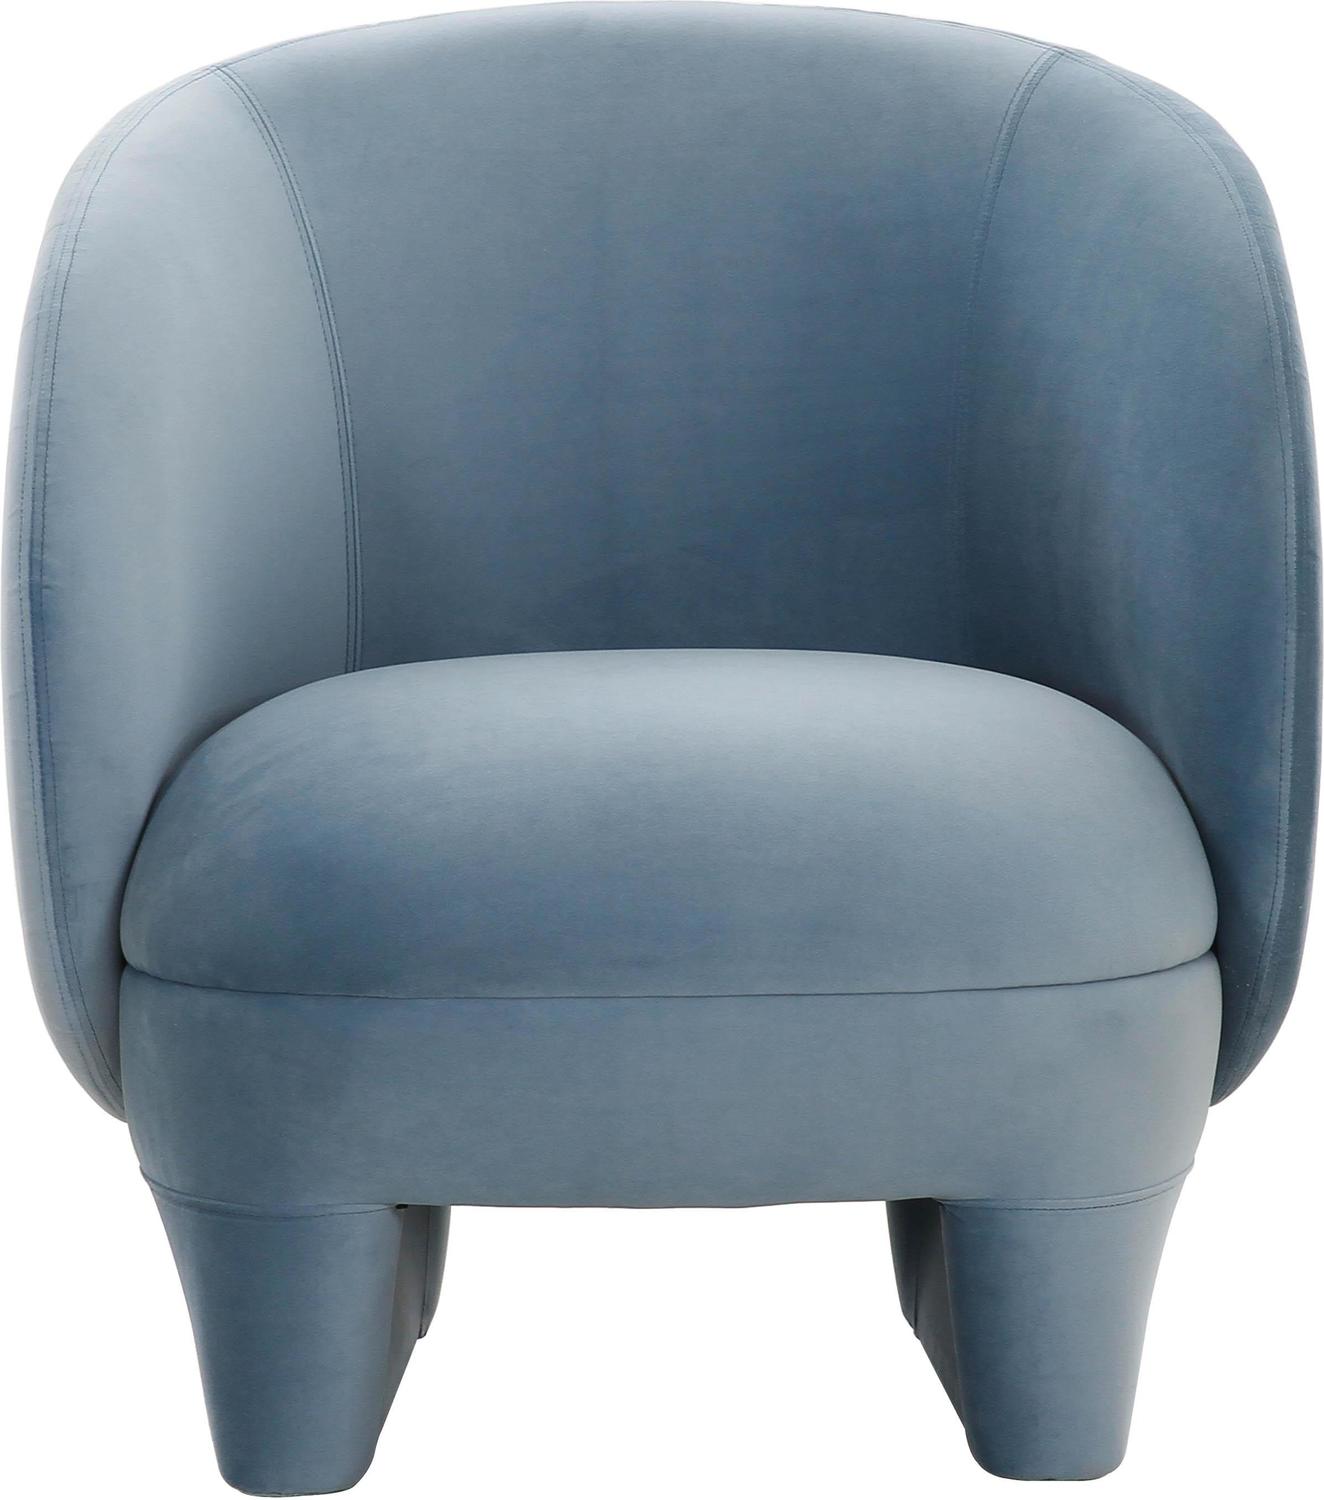 single chair design for living room Contemporary Design Furniture Accent Chairs Blue